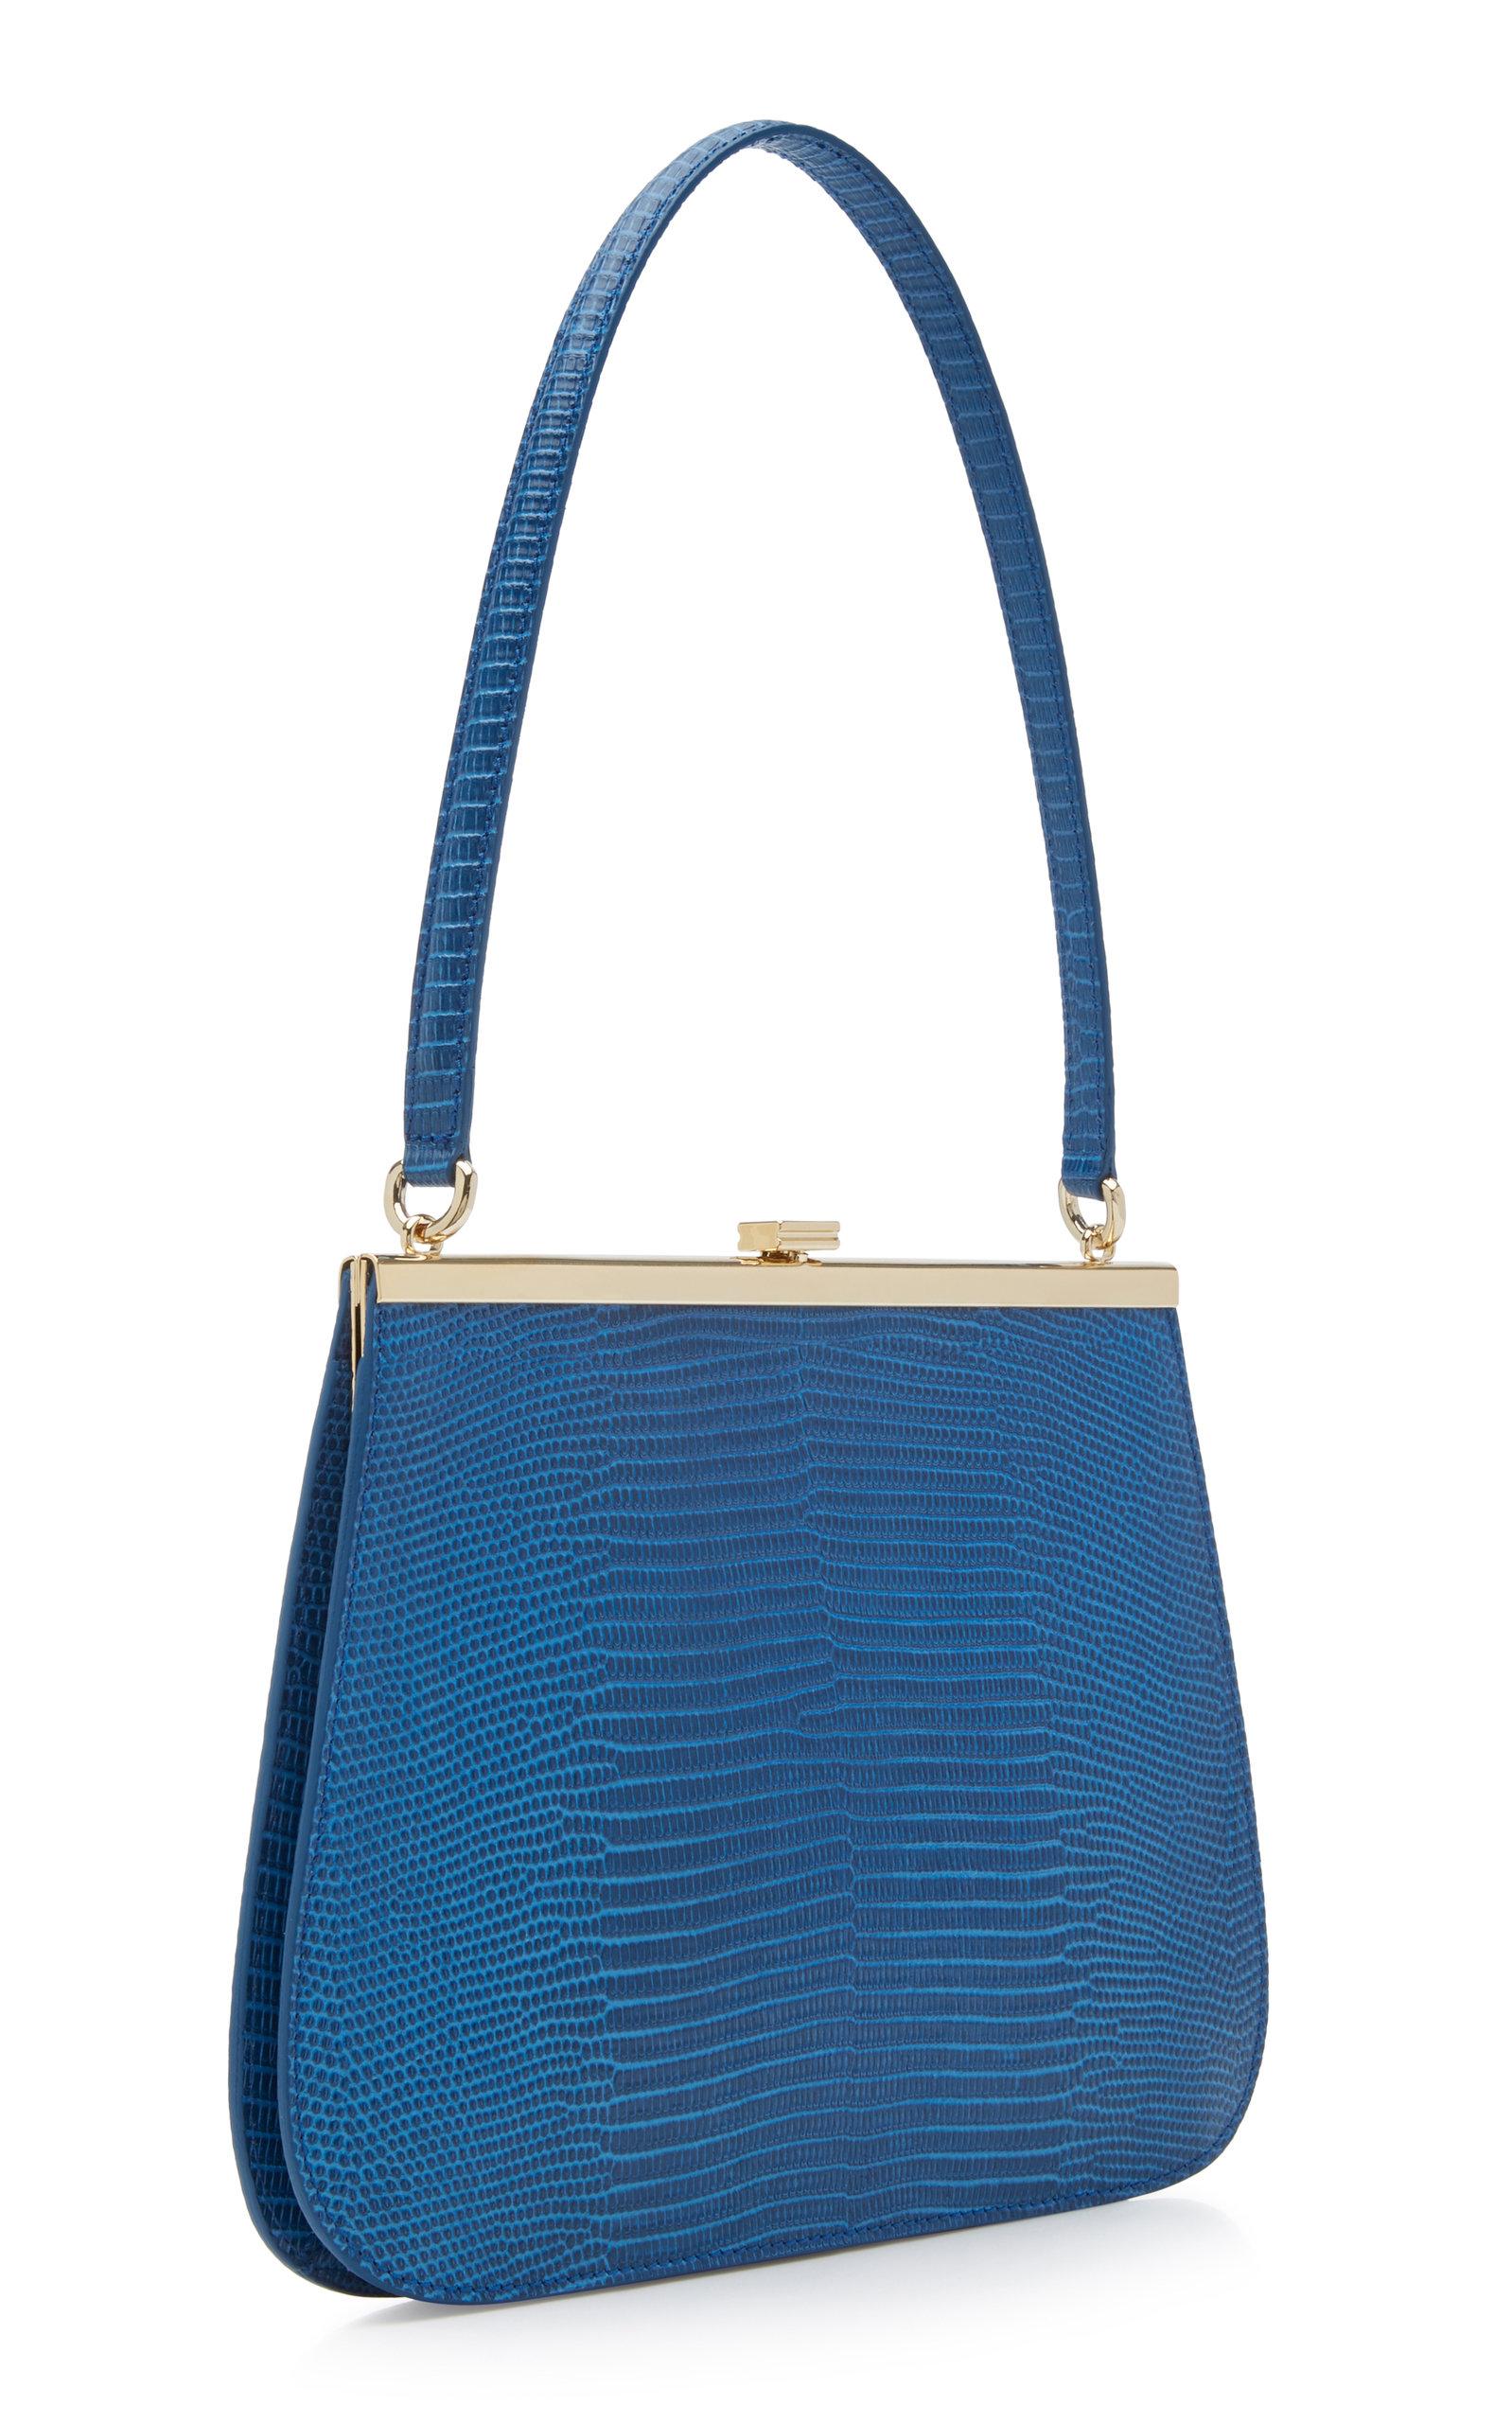 Tl-180 Anouk Lizard-embossed Leather Handle Bag in Blue - Lyst